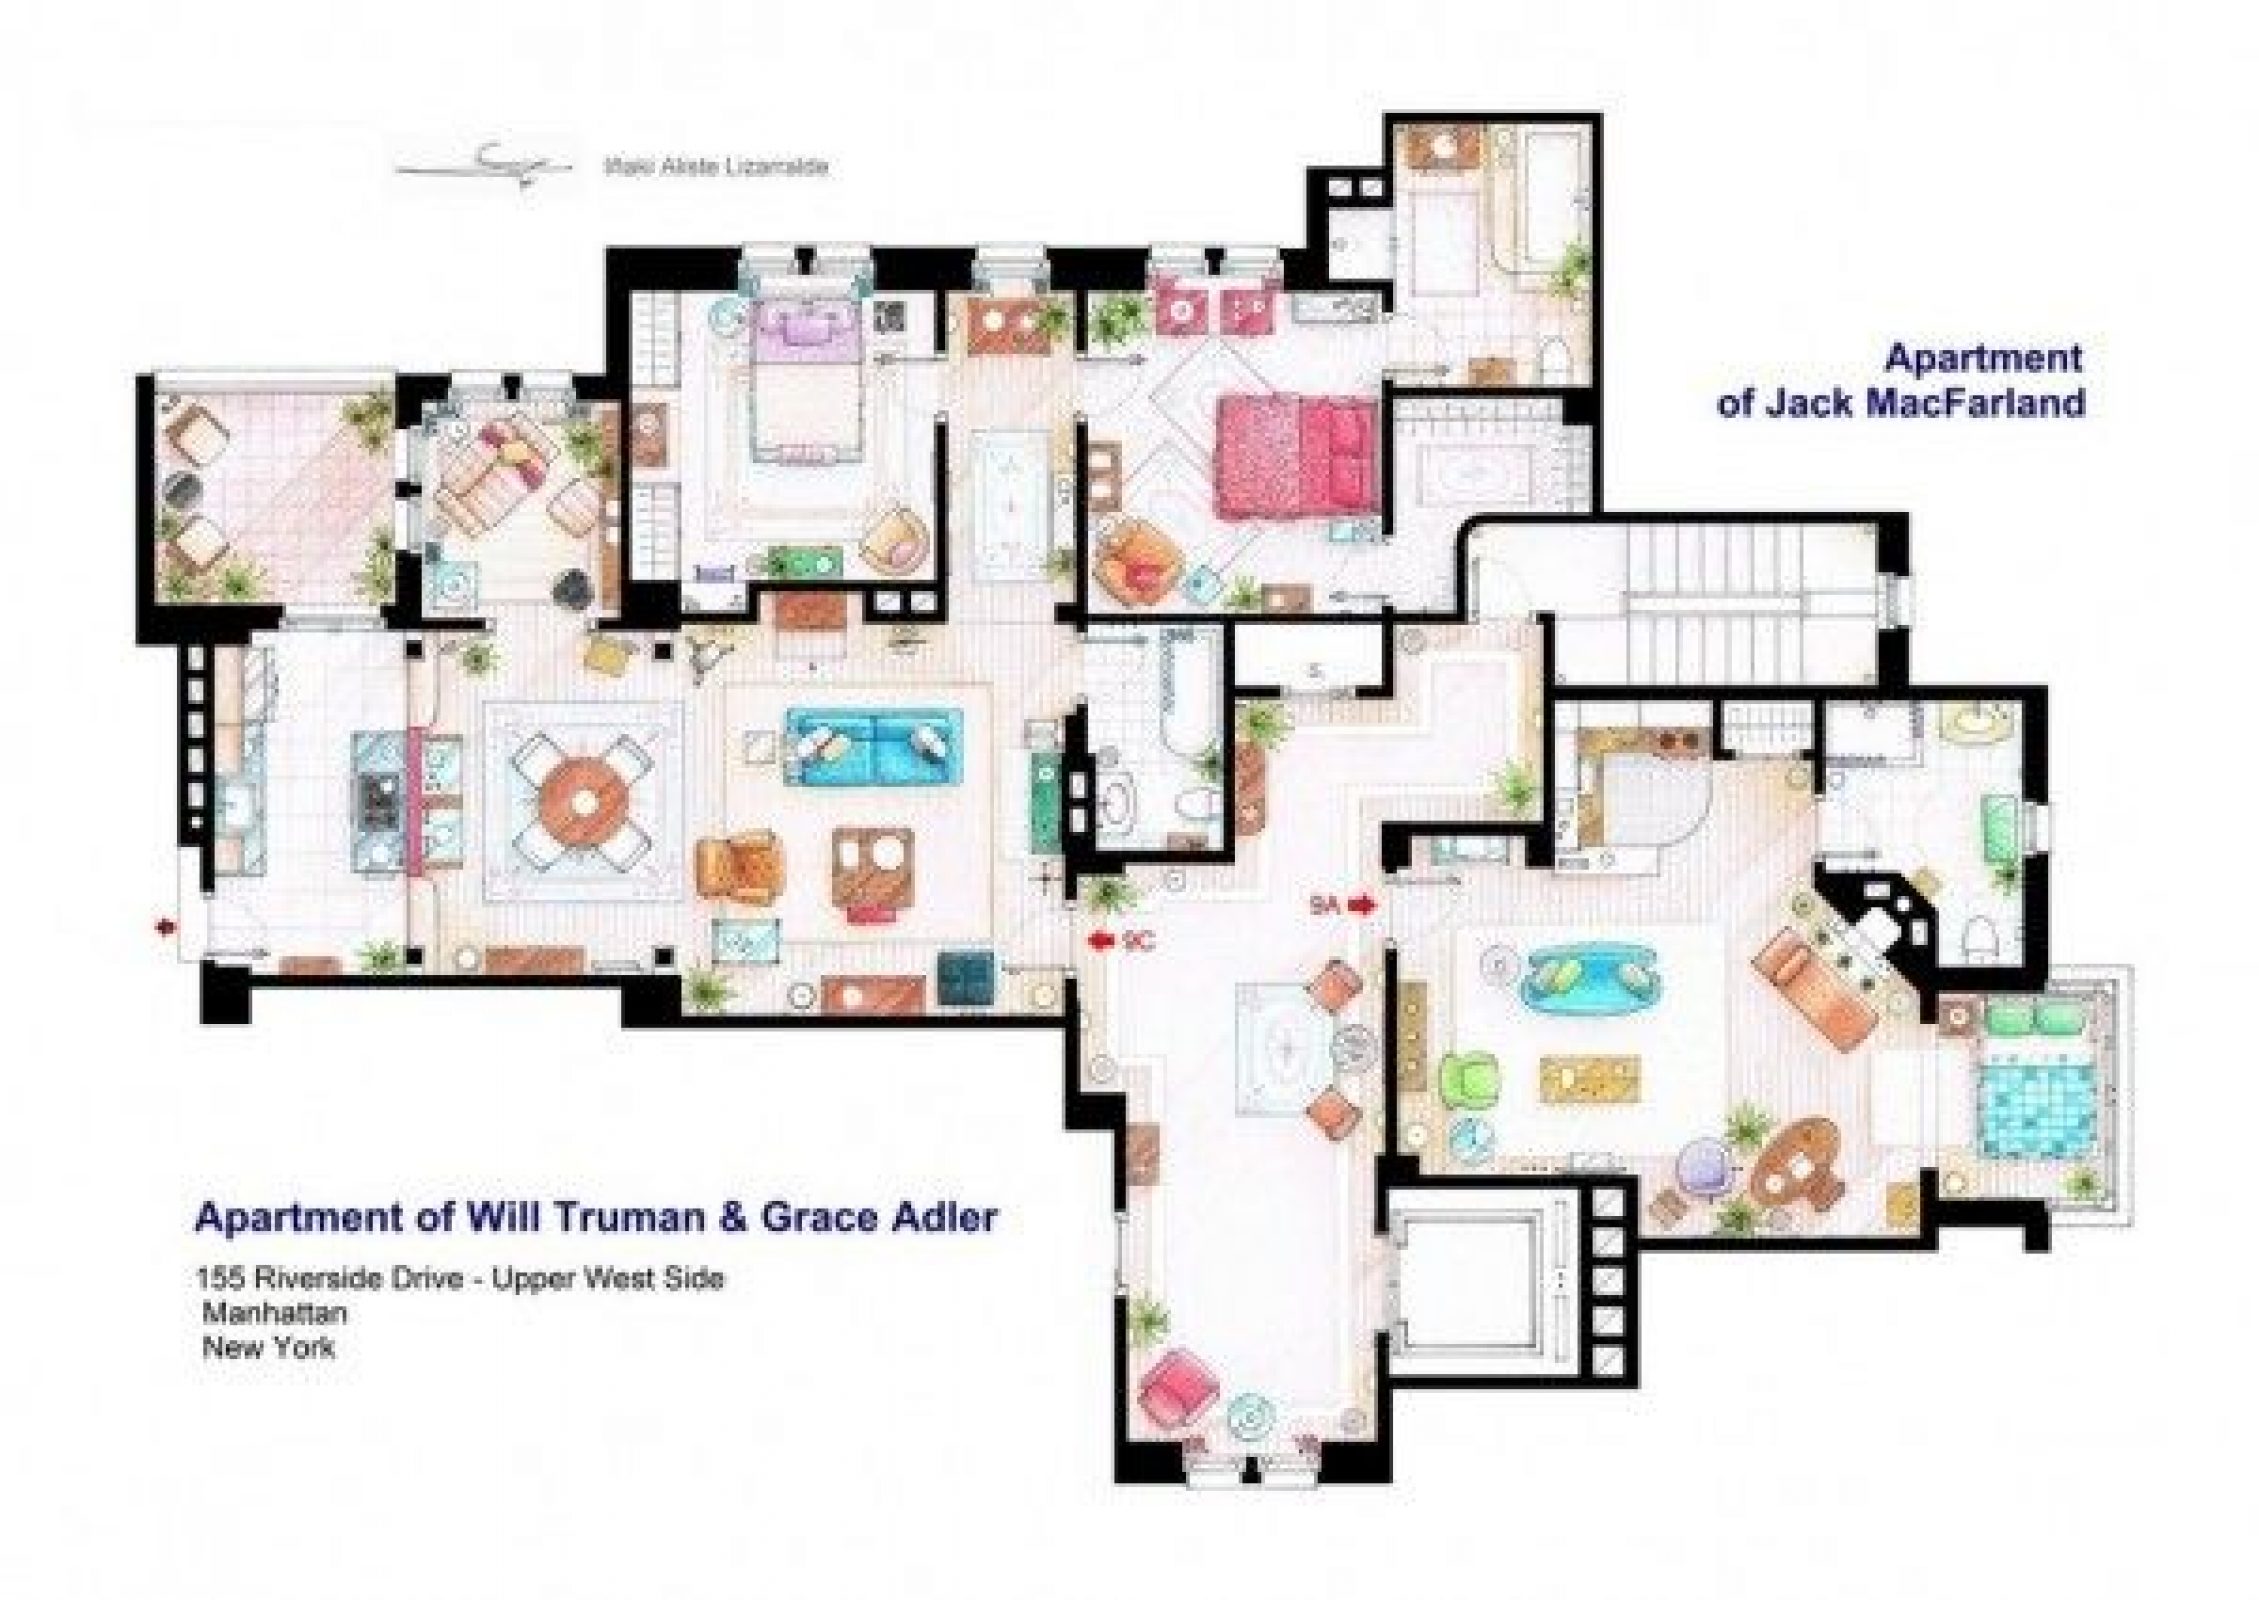 25 Perfectly Detailed Floor Plans of Homes from Popular TV